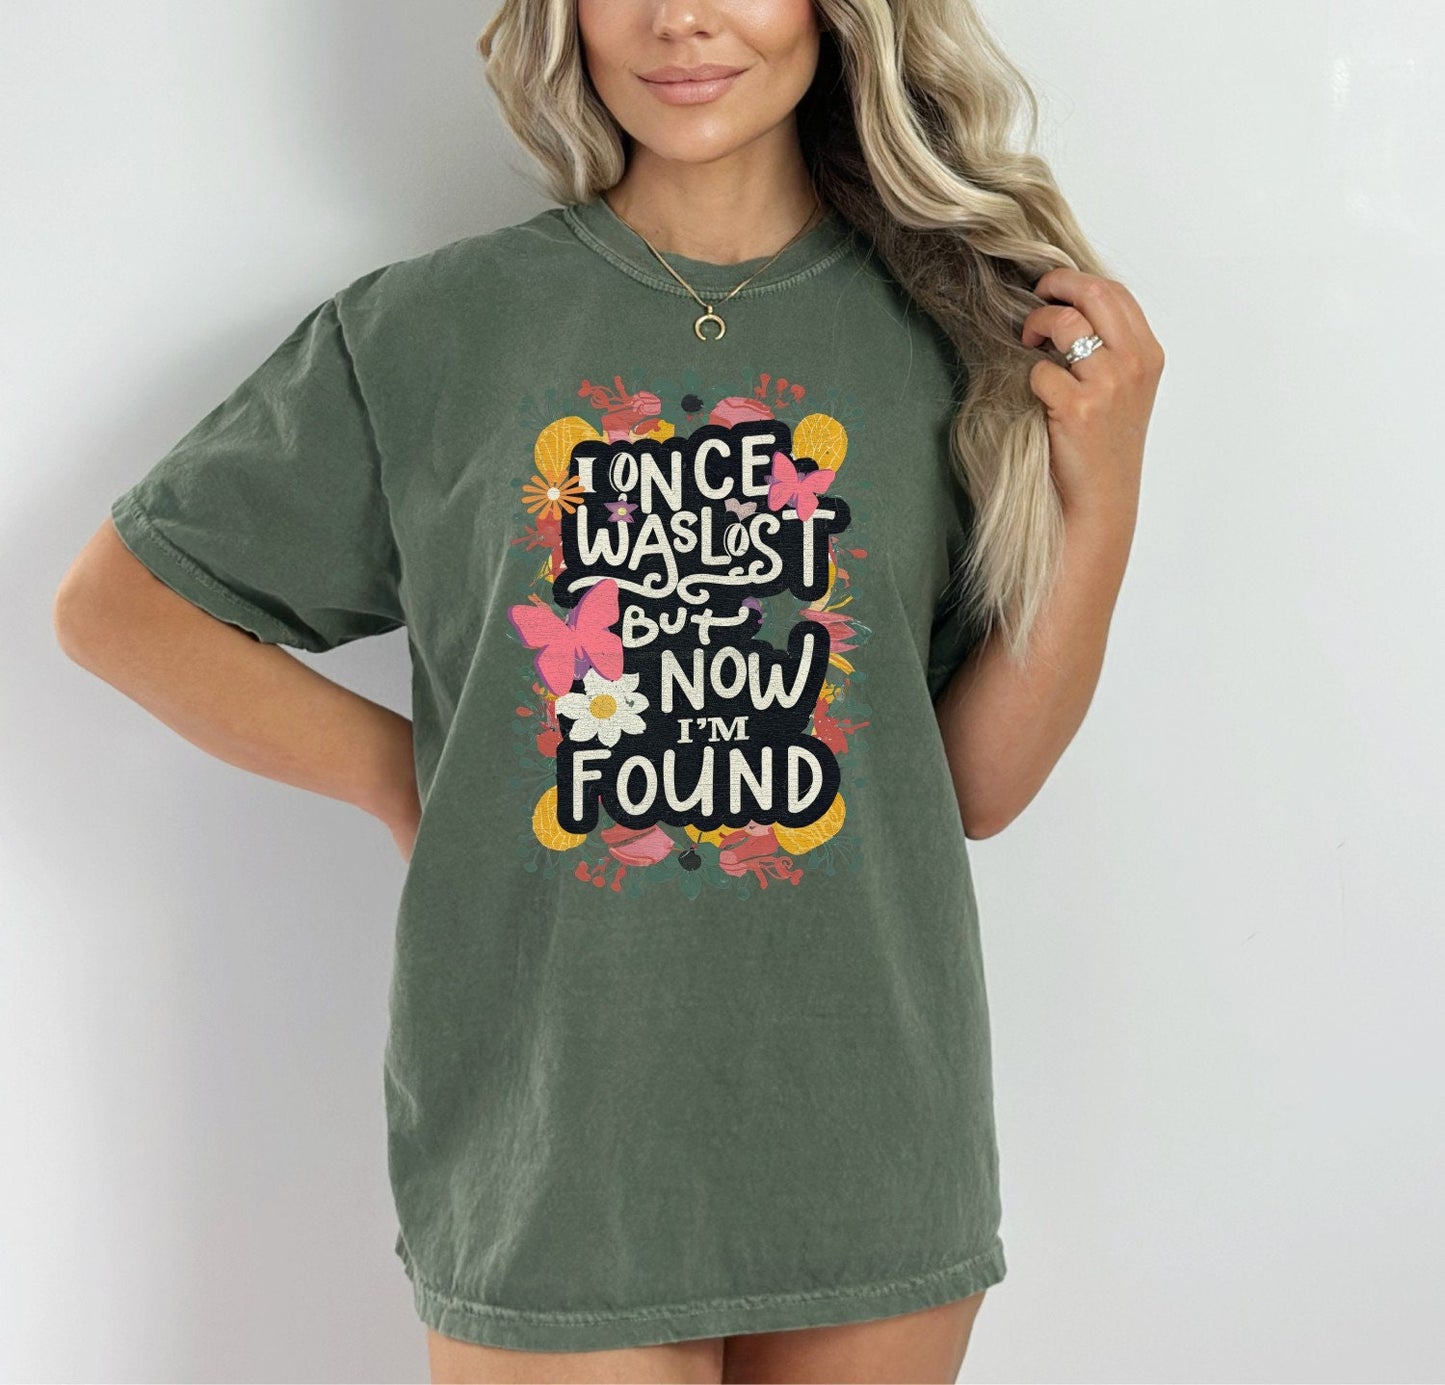 Christian Shirts Religious Tshirt Christian T Shirts Boho Christian Shirt Bible Verse Shirt I Once Was Lost But Now I'm Found Shirt